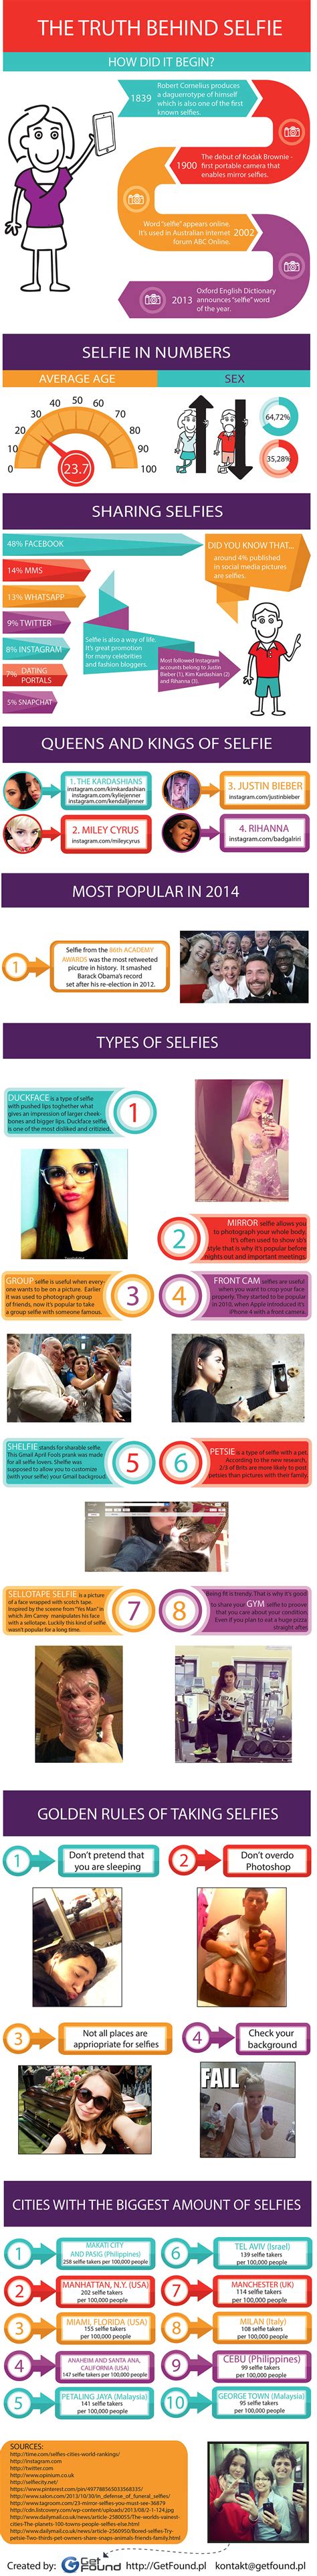 Infographic About Selfie You Will Find Information Such As What Is The Average Age Of A